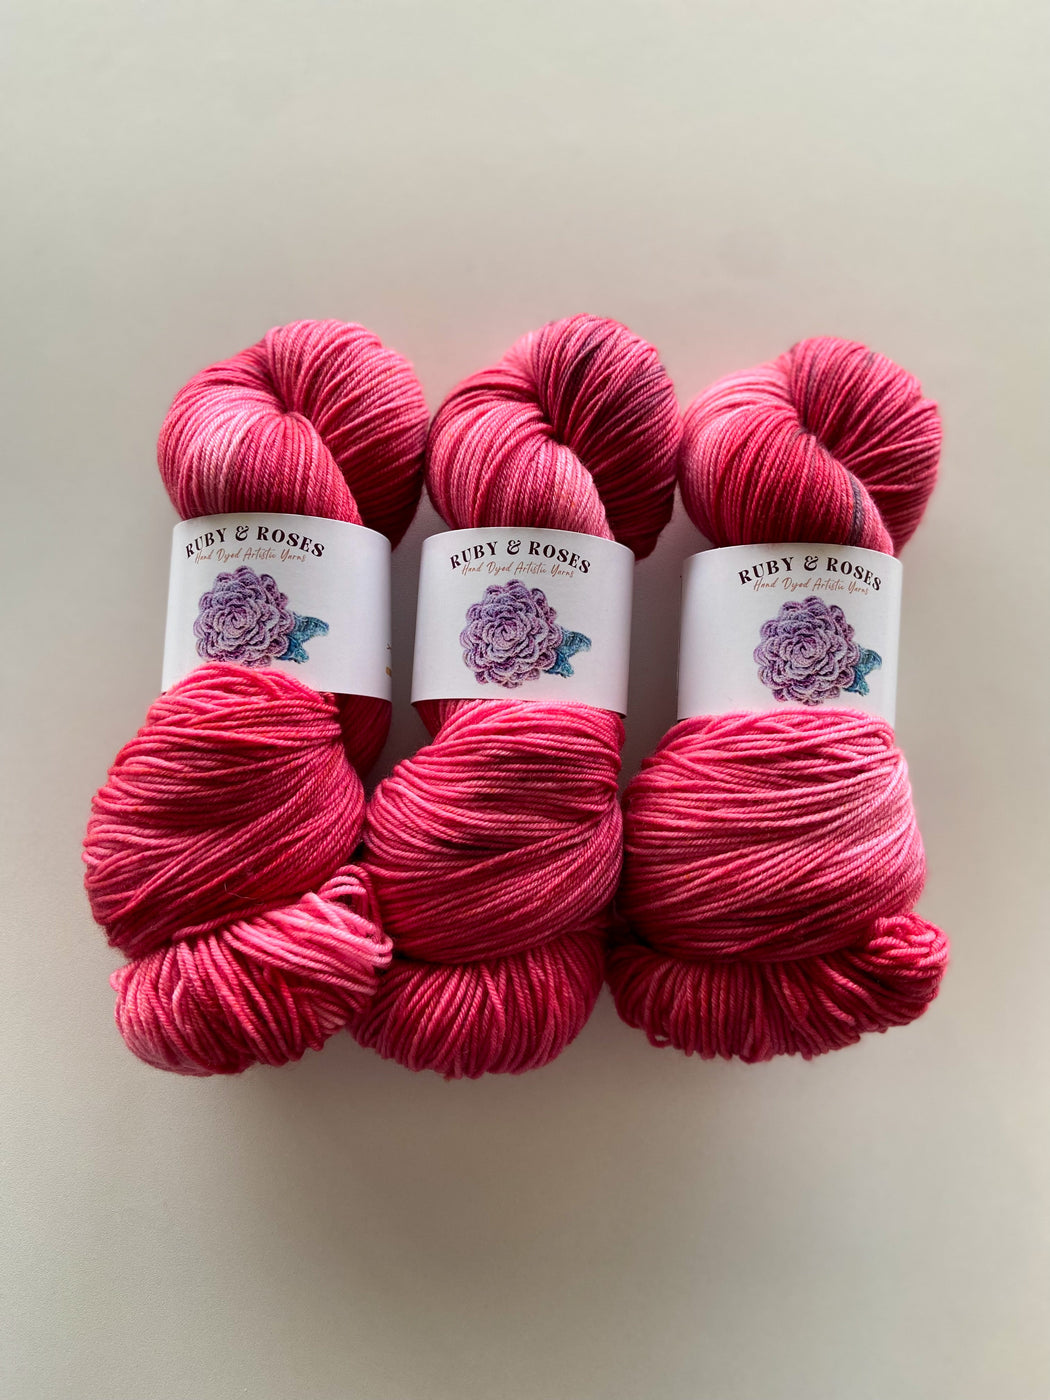 Misfit - OOAK - Ruby and Roses Yarn - Hand Dyed Yarn